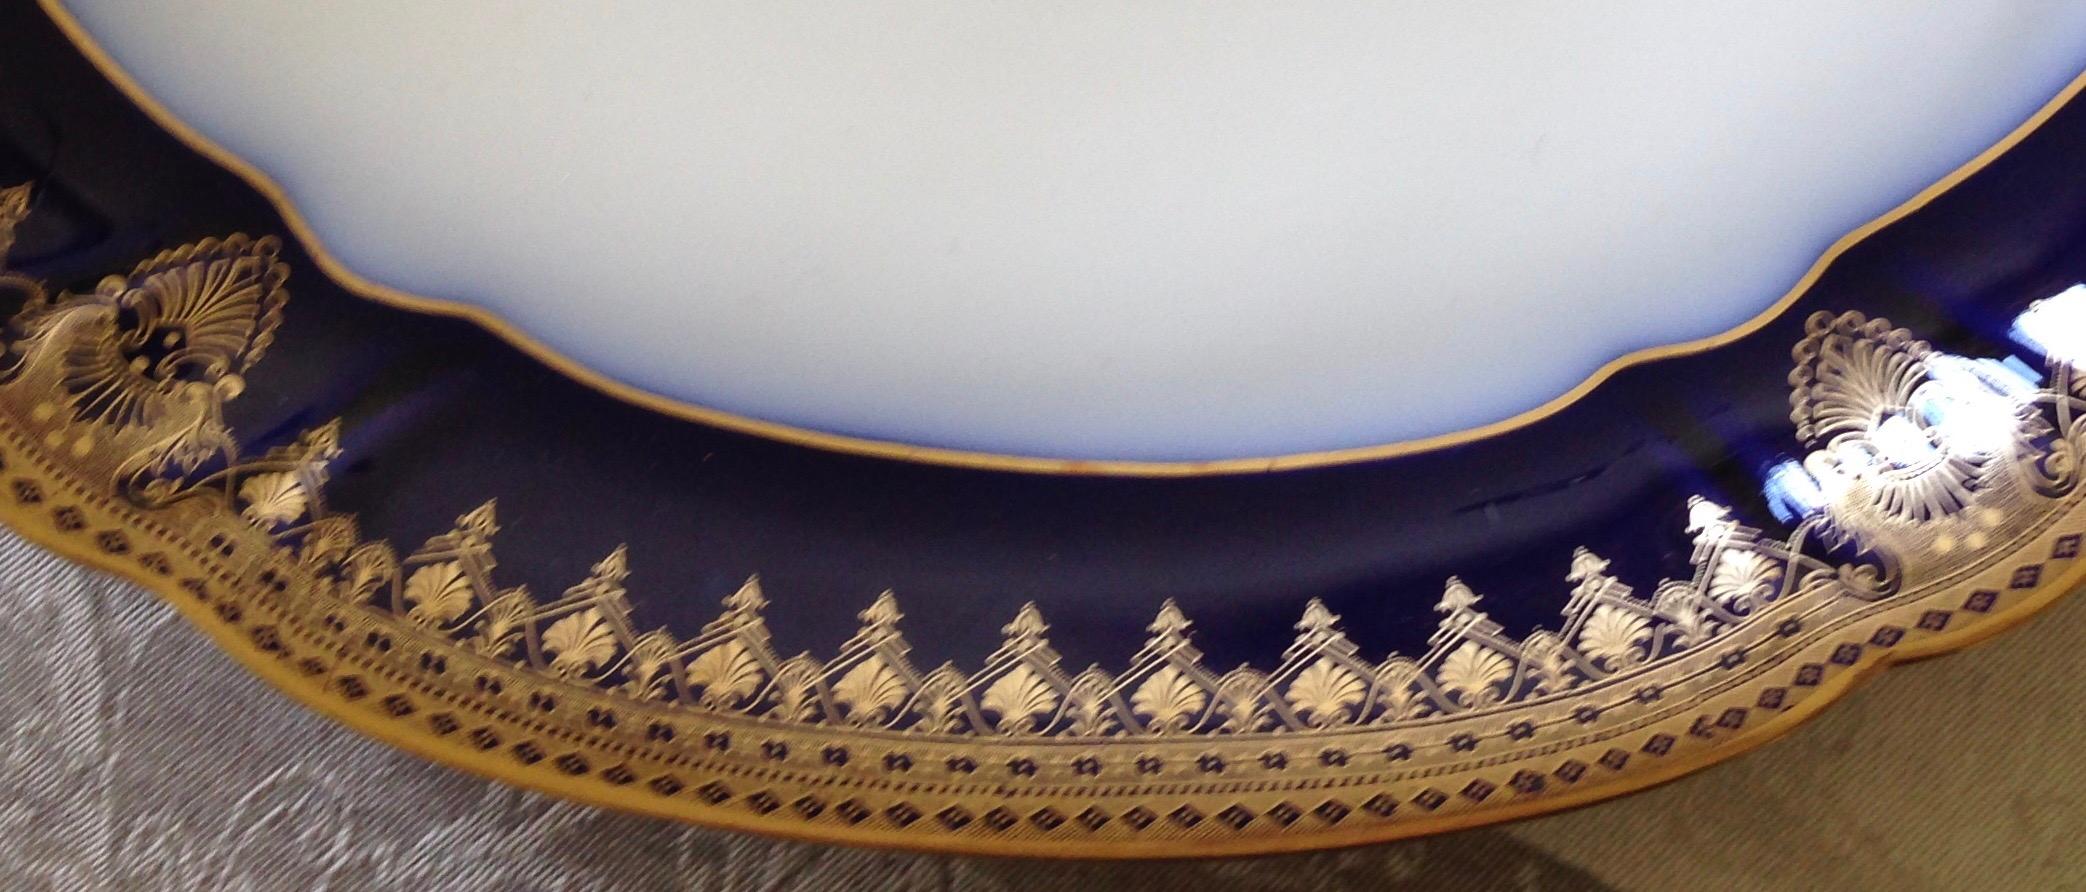 French Gold Encrusted Cobalt Nested Platters by Wm Guerin, Limoges, Set of 3 For Sale